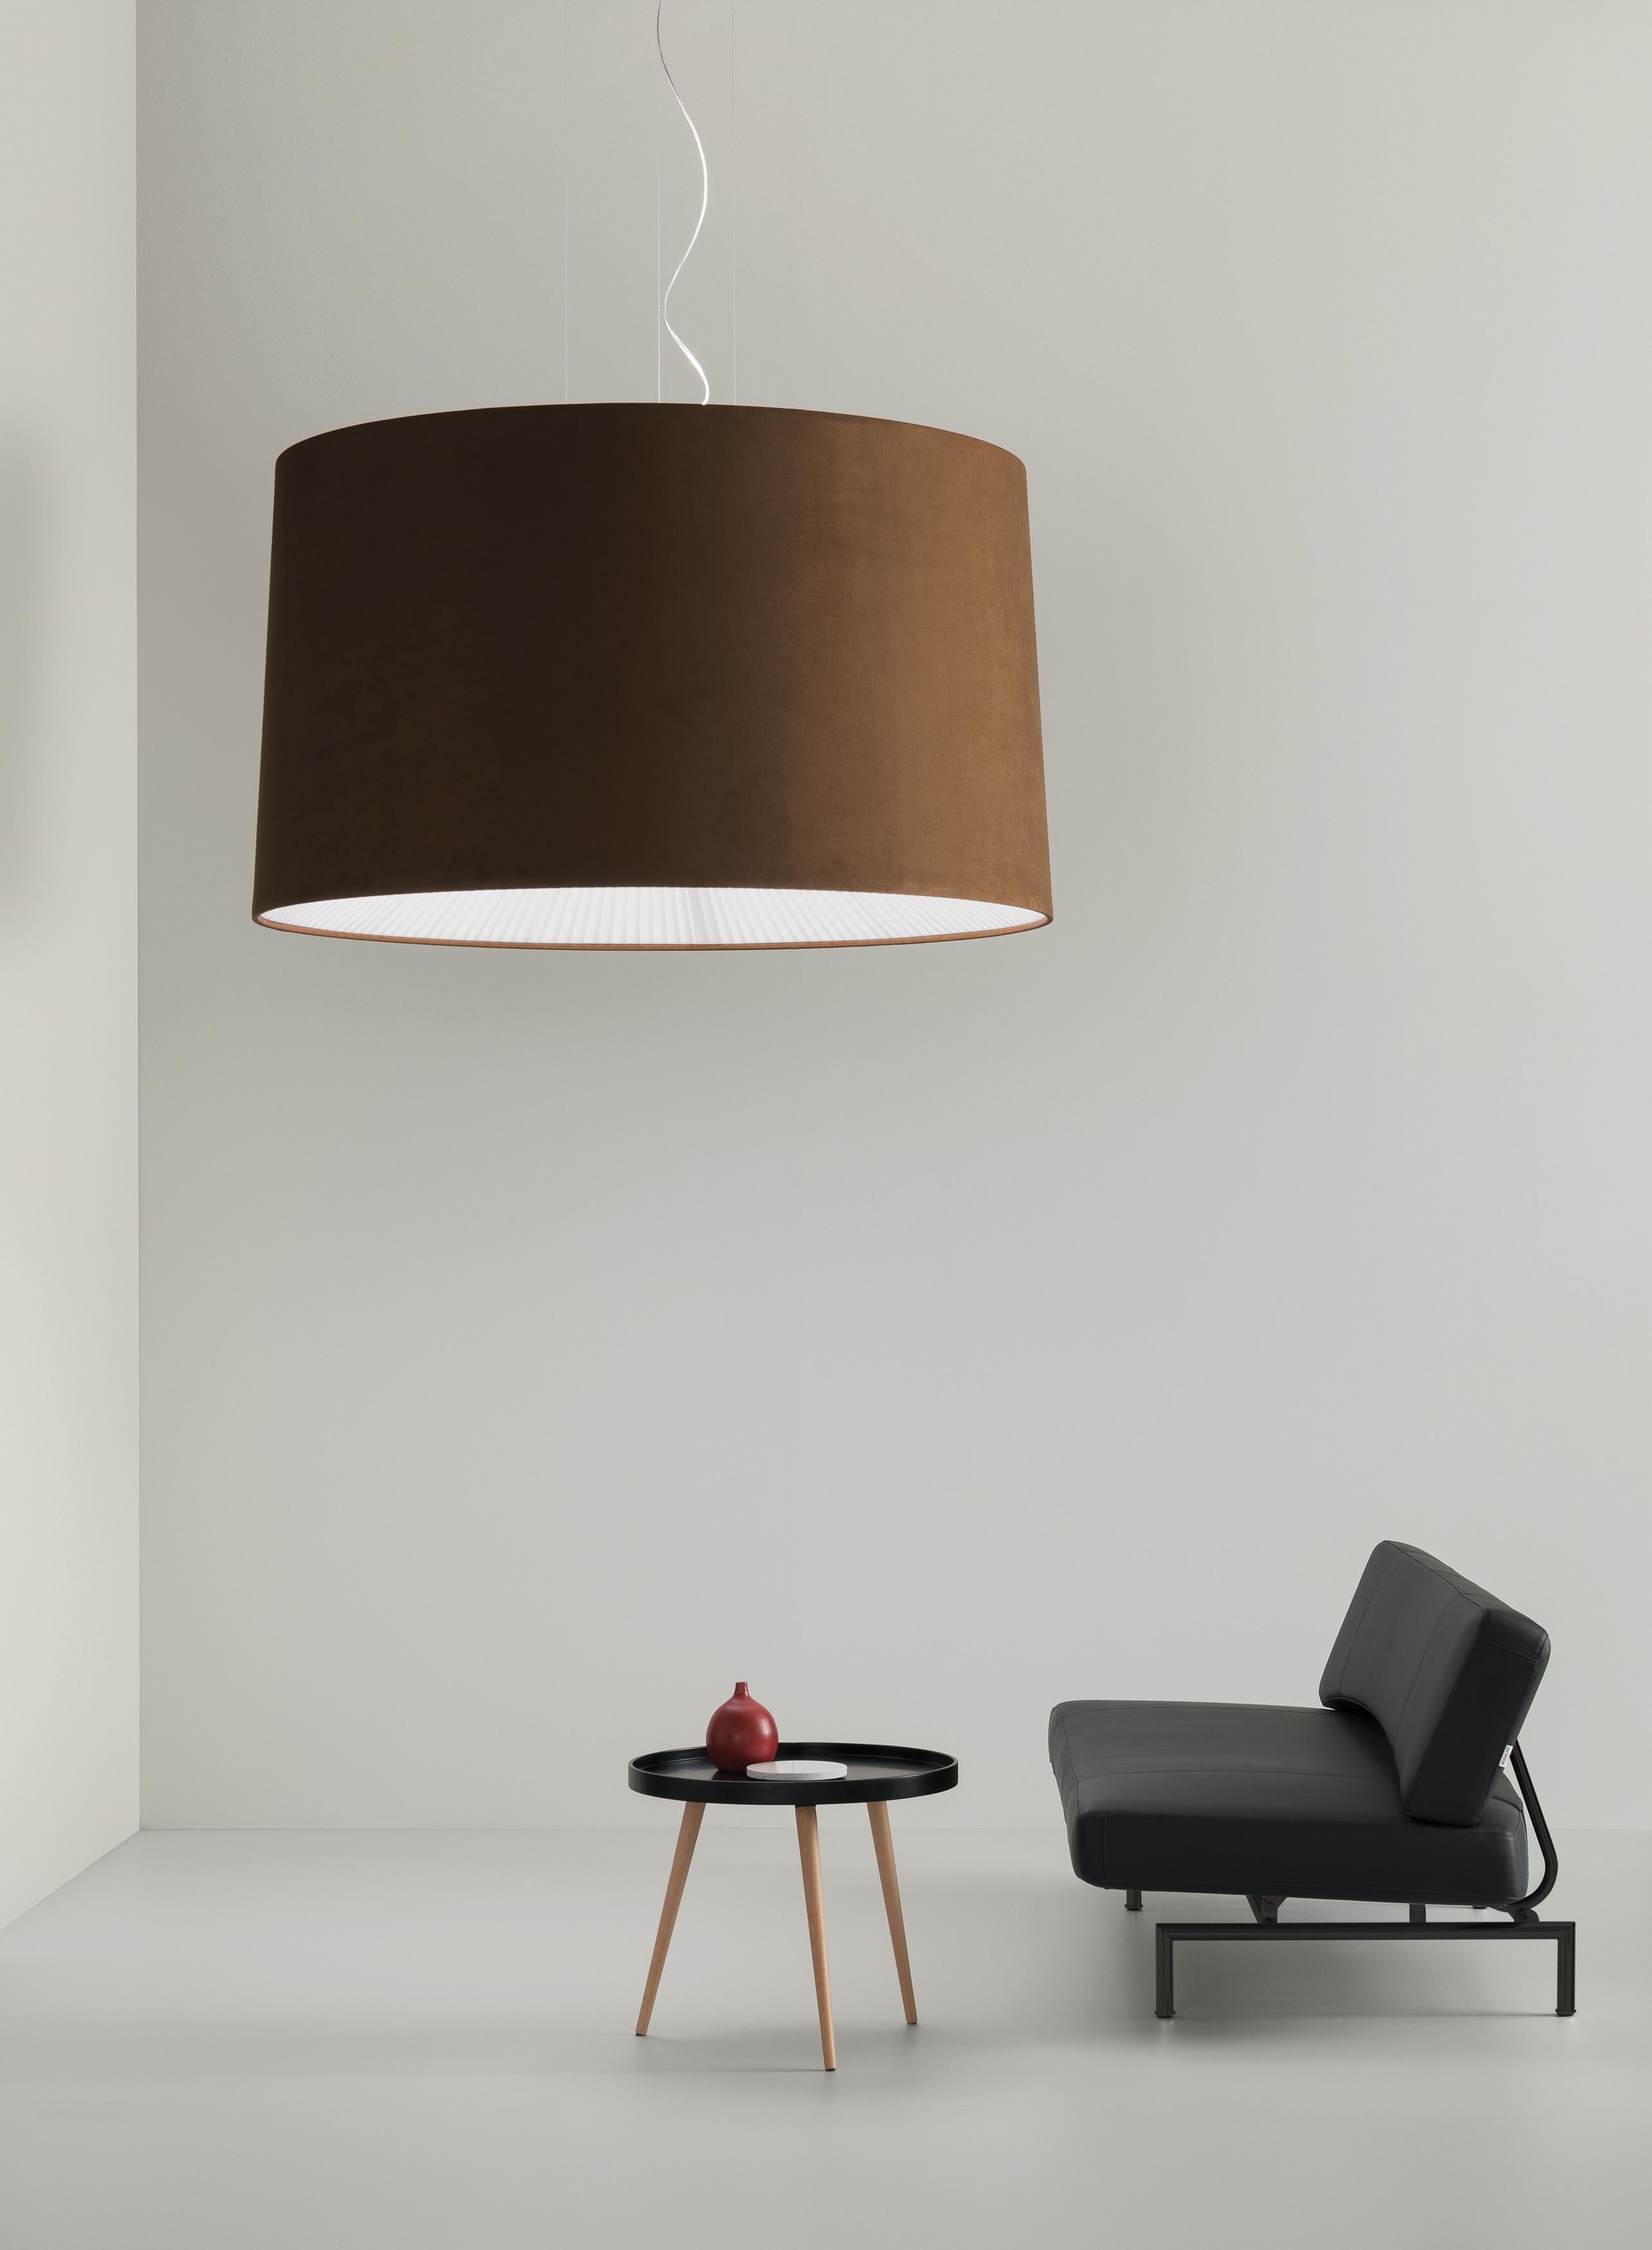 Axolight Large Velvet Pendant Lamp in White by Manuel & Vanessa Vivian

The essential geometry, combined with the velvet-like texture, give life to Velvet. A collection full of charm and timeless elegance. The simplicity of its timeless design, the